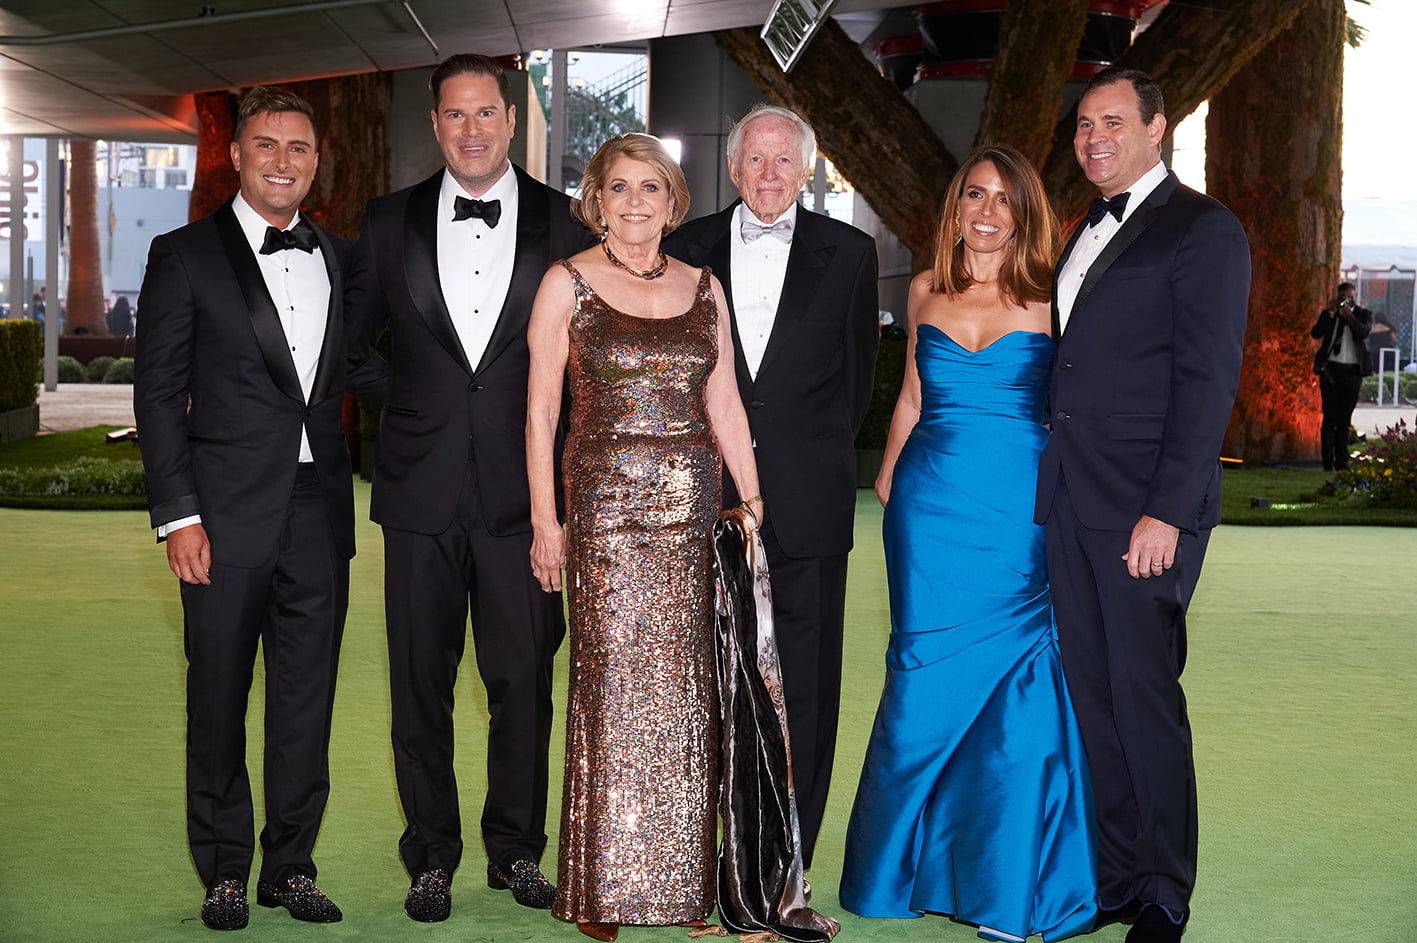 Tom Dolby, Dagmar Dolby, Natasha Dolby, David Dolby, and Brad Comfort attend the Academy Museum of Motion Pictures Opening Gala, September 25, 2021